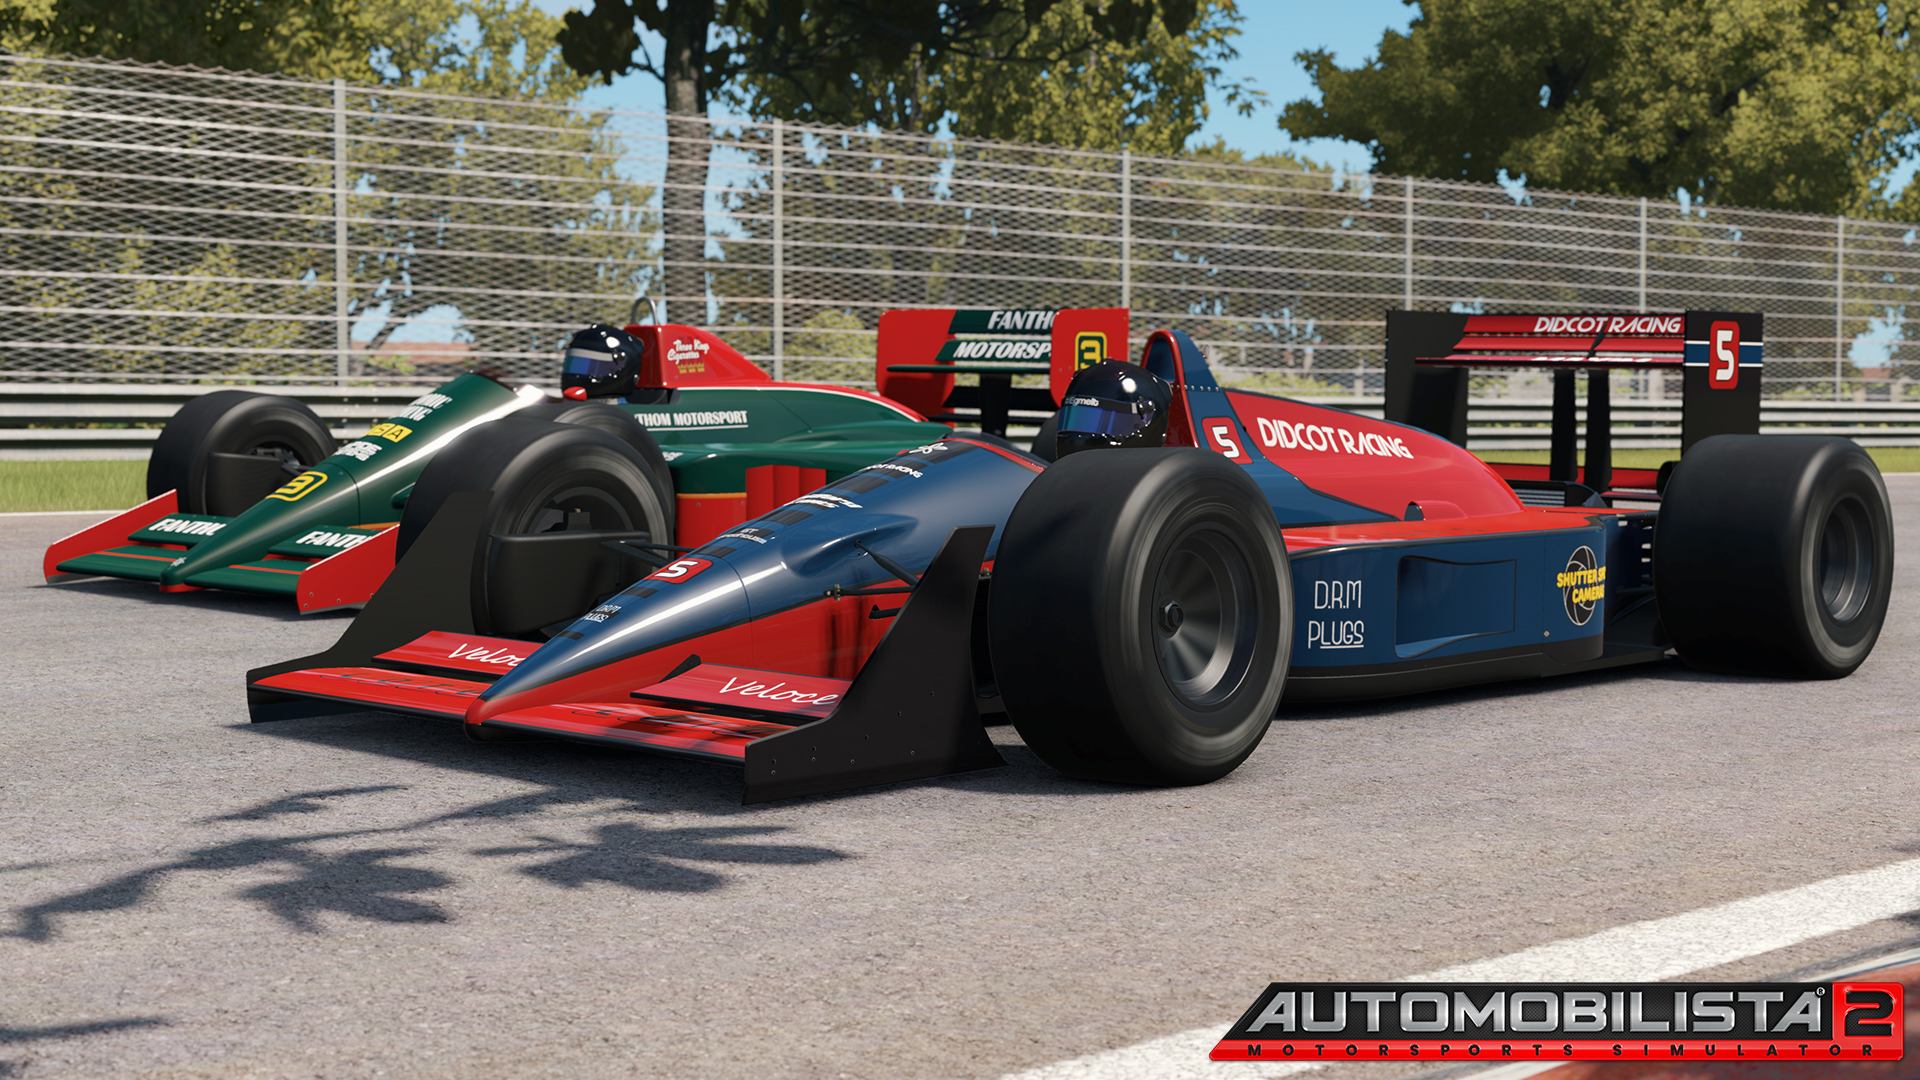 Automobilista 2 v1.0.2.0 Now Available, Adds Lotus 49C 